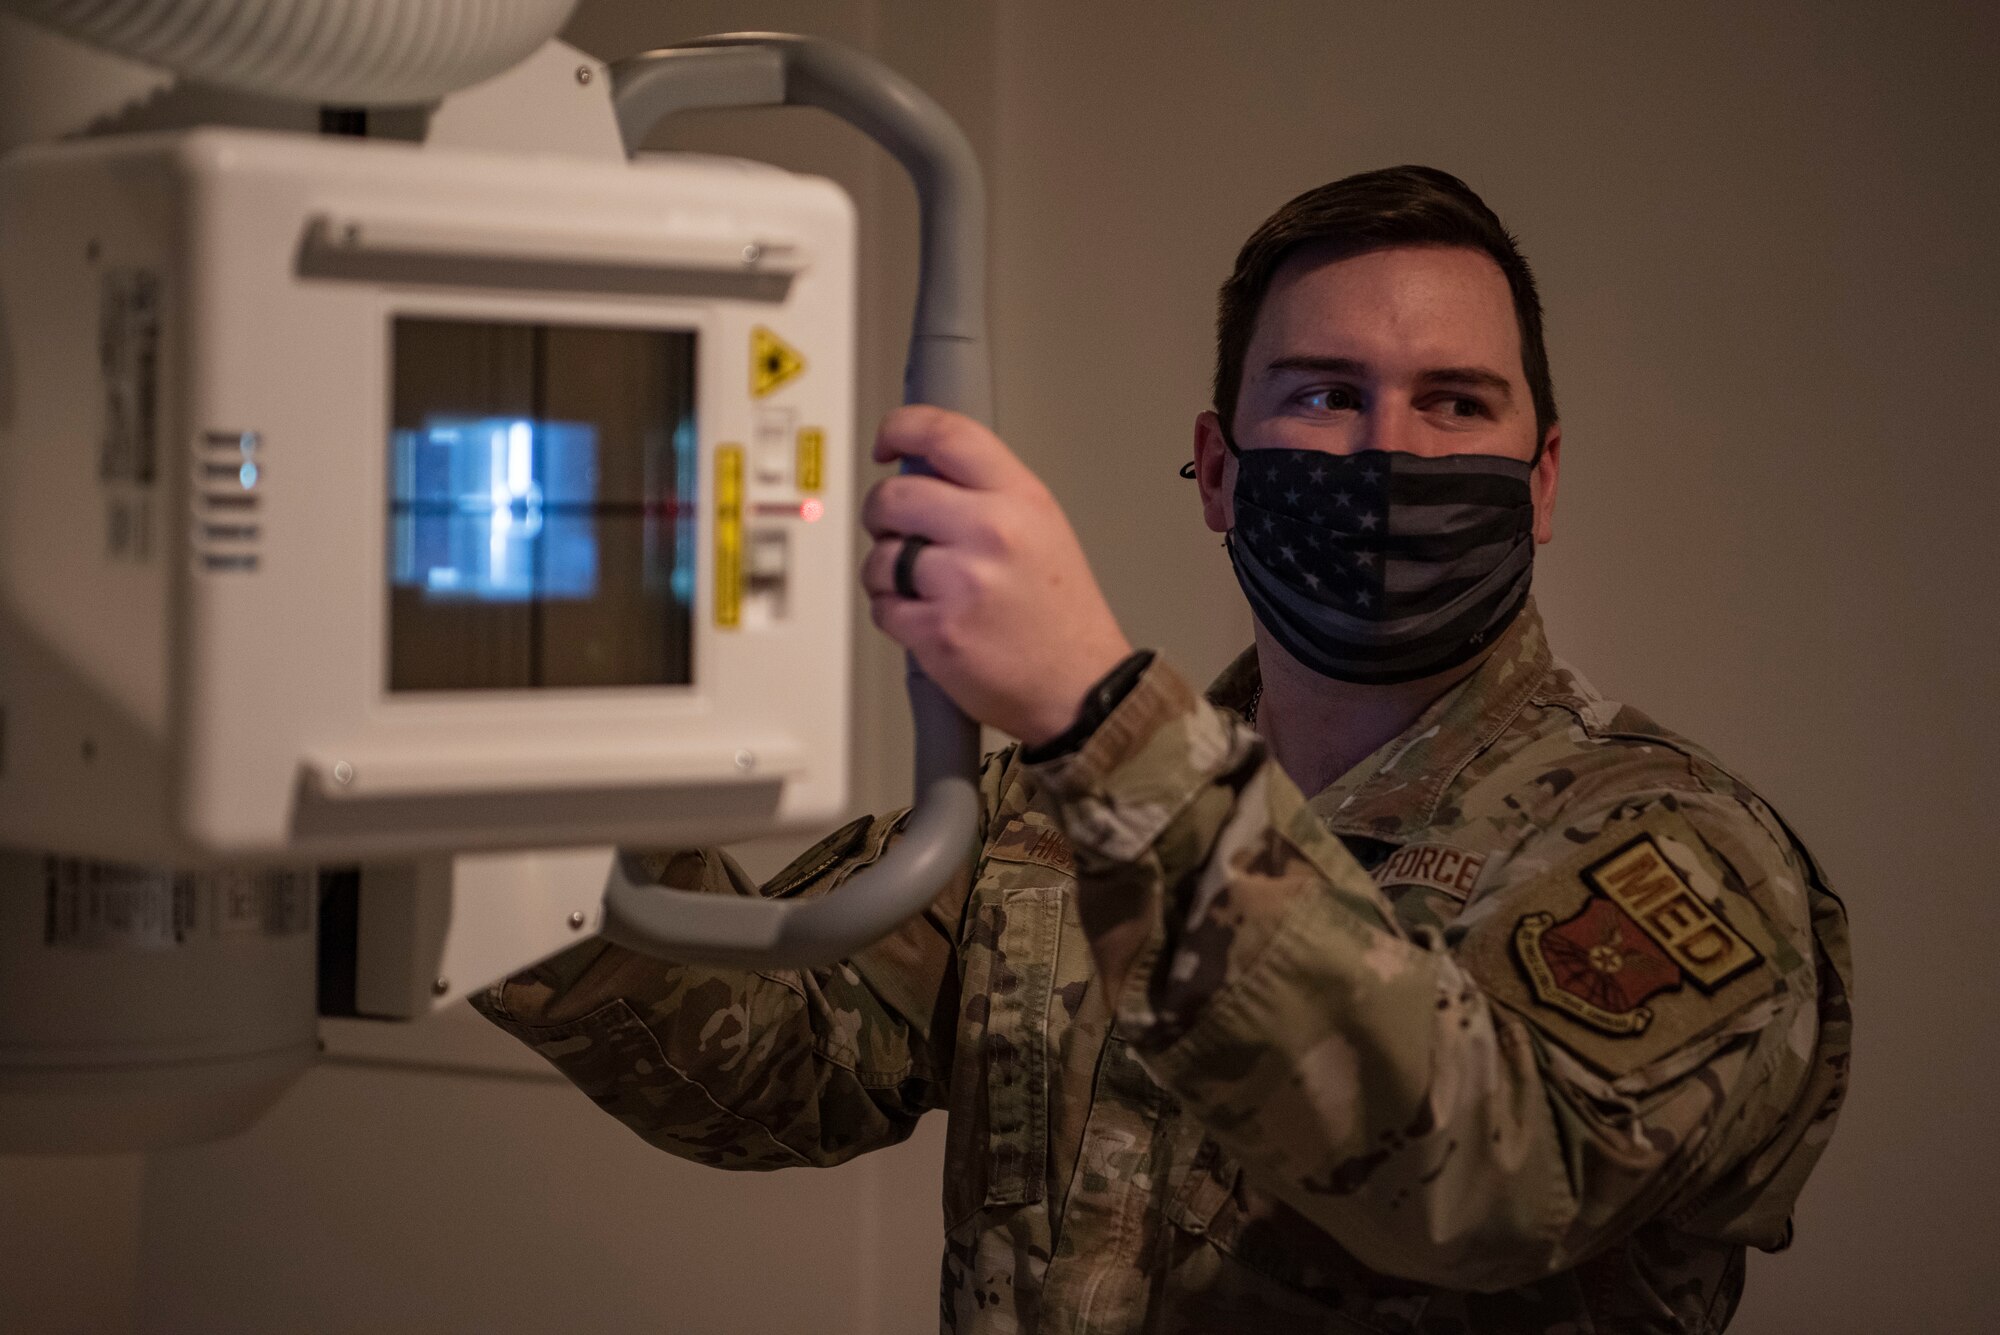 U.S. Air Force Staff Sgt. Anthony Hiser, 7th Health Care Operations Squadron diagnostic imaging technologist, adjusts an X-ray machine at Dyess Air Force Base, Texas, Feb. 8, 2023. The Dyess Radiology Clinic ensures military personnel and their families receive quality health care by taking X-ray images that are digitally transmitted through the picture archiving and communication system to be read by a radiologist at Travis AFB, California. (U.S. Air Force photo by Airman 1st Class Ryan Hayman)